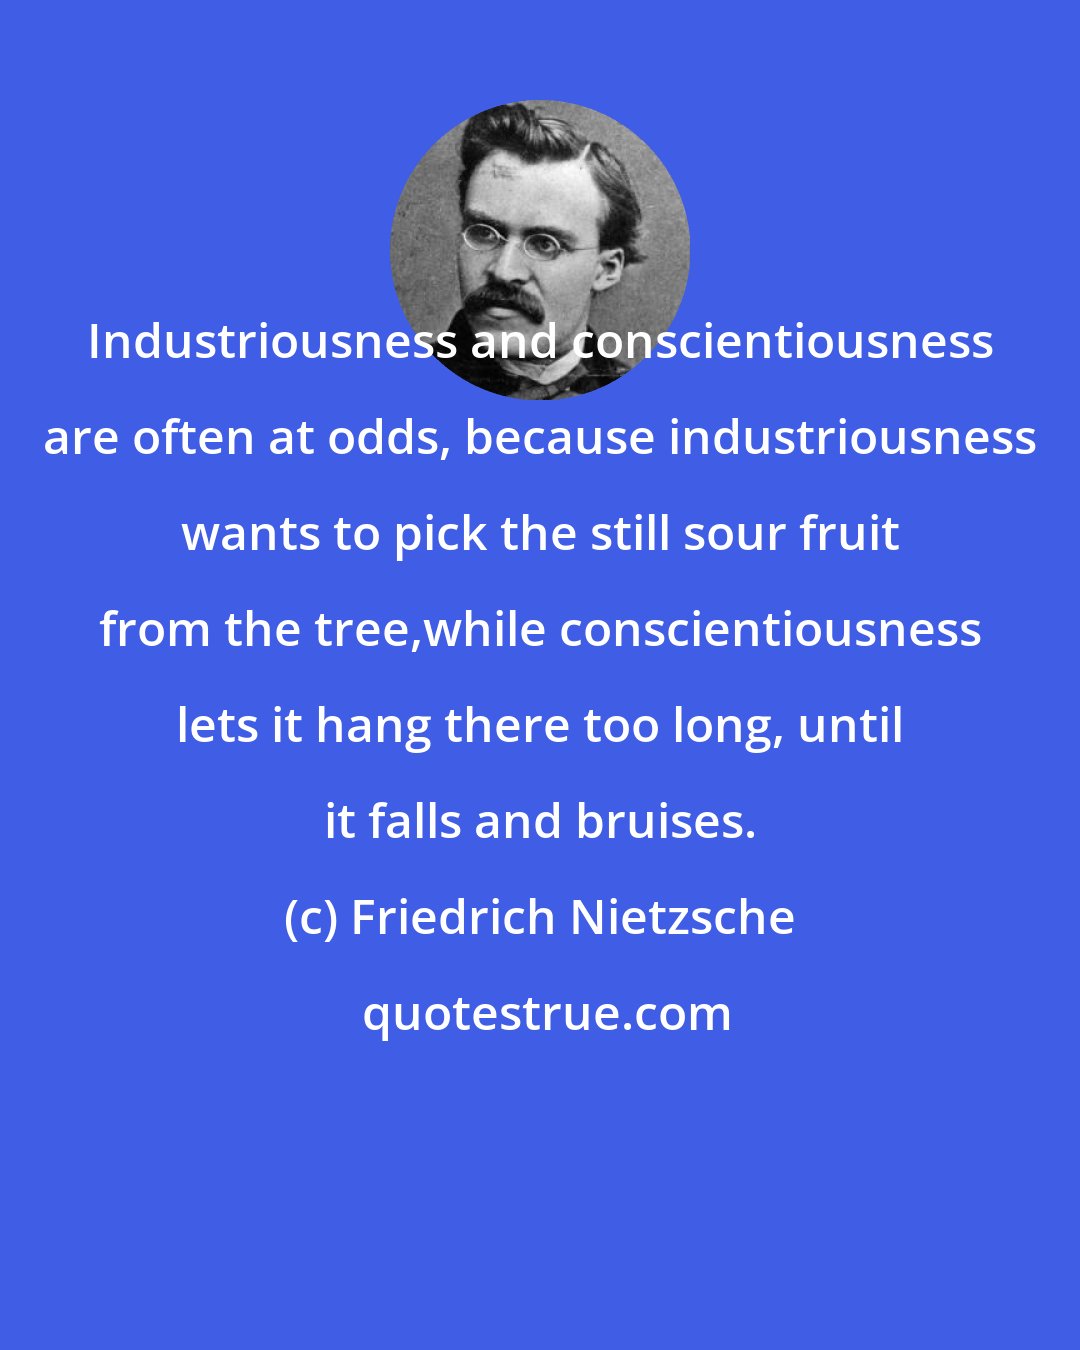 Friedrich Nietzsche: Industriousness and conscientiousness are often at odds, because industriousness wants to pick the still sour fruit from the tree,while conscientiousness lets it hang there too long, until it falls and bruises.